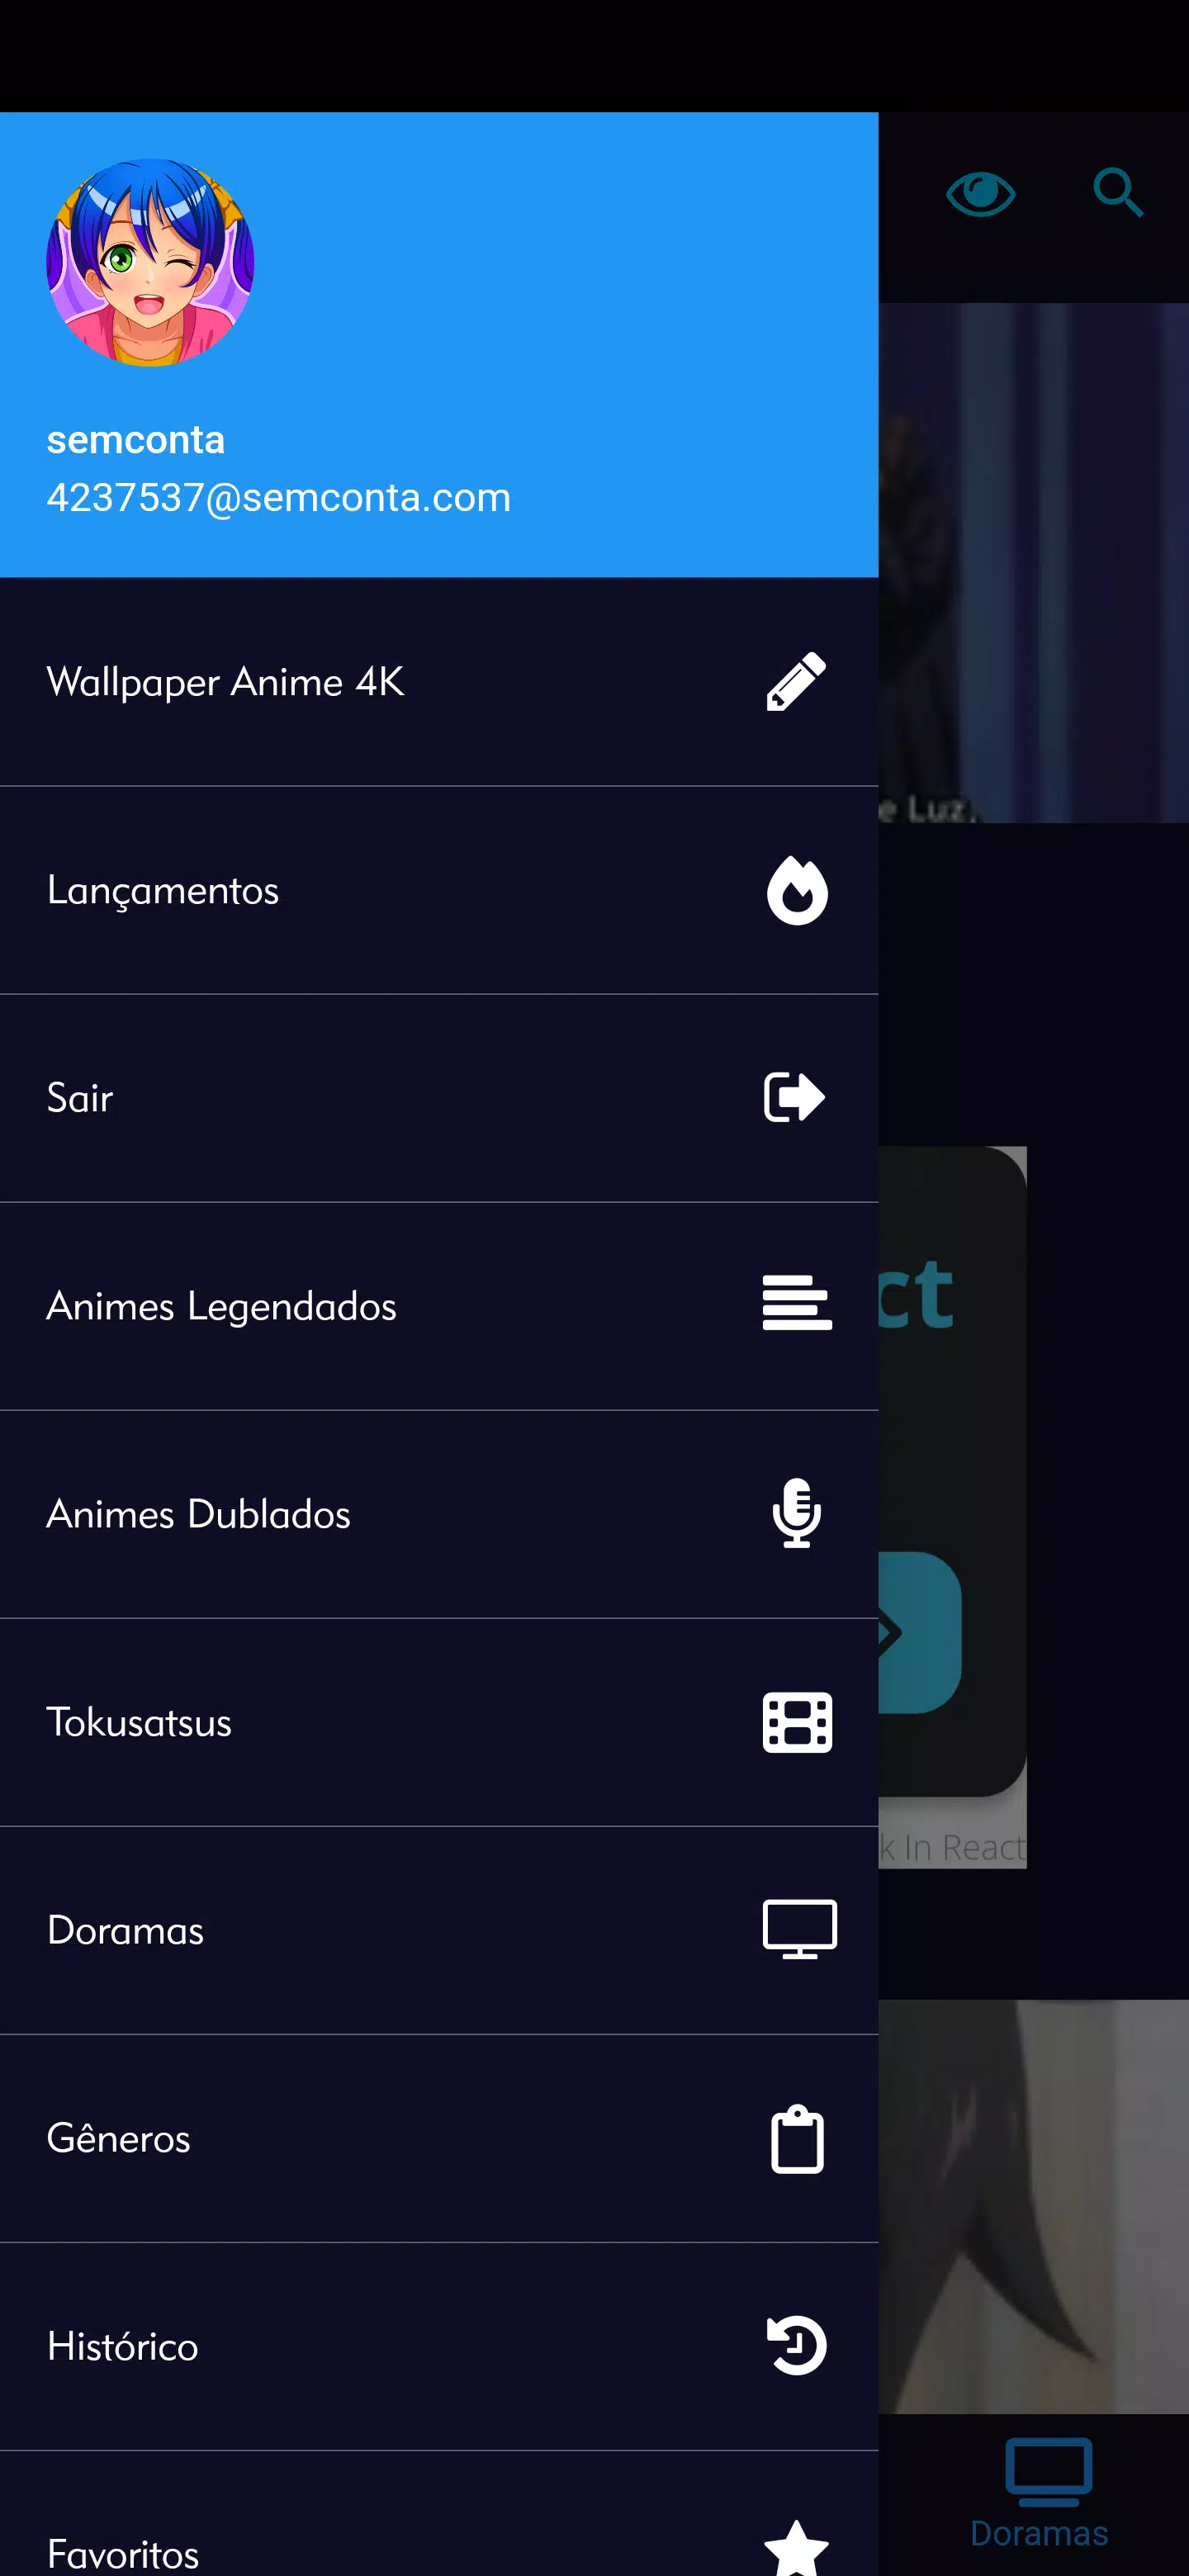 Anitube Delta - APK Download for Android